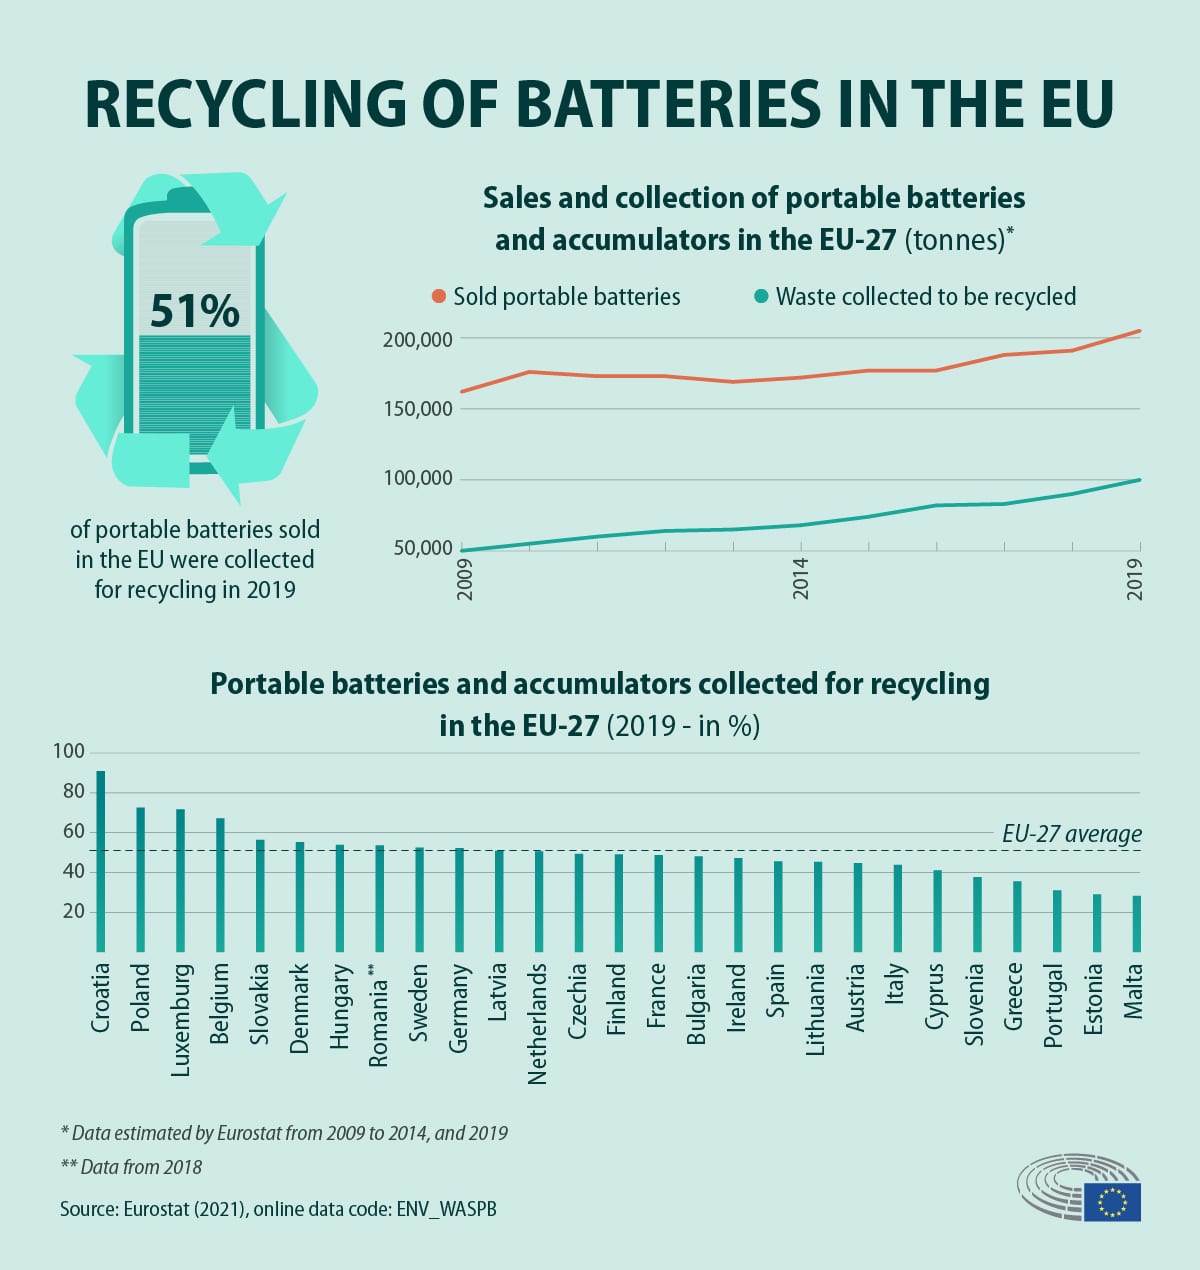 Recycling rate for portable batteries and accumulators for each EU country